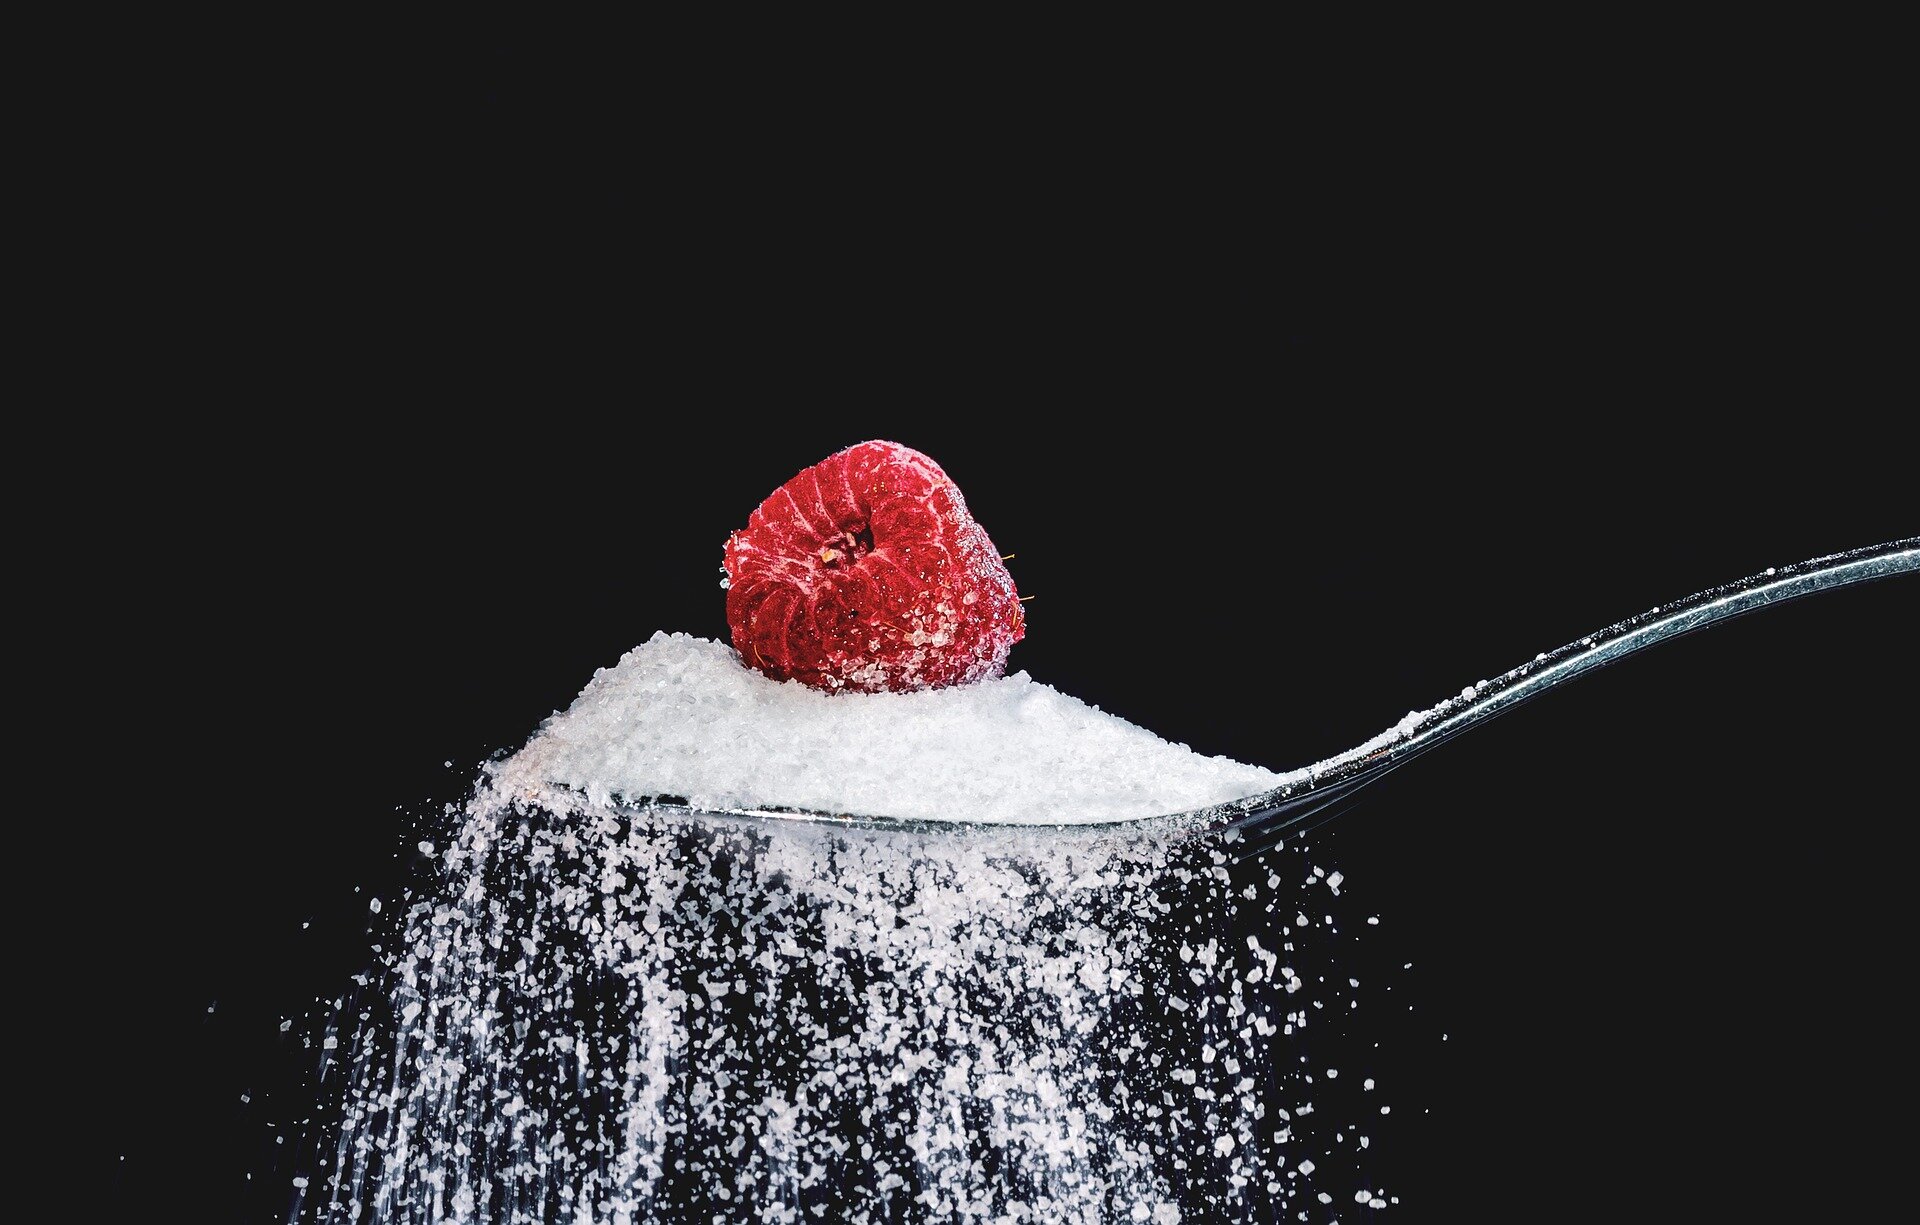 #Free sugars associated with higher risk of cardiovascular disease